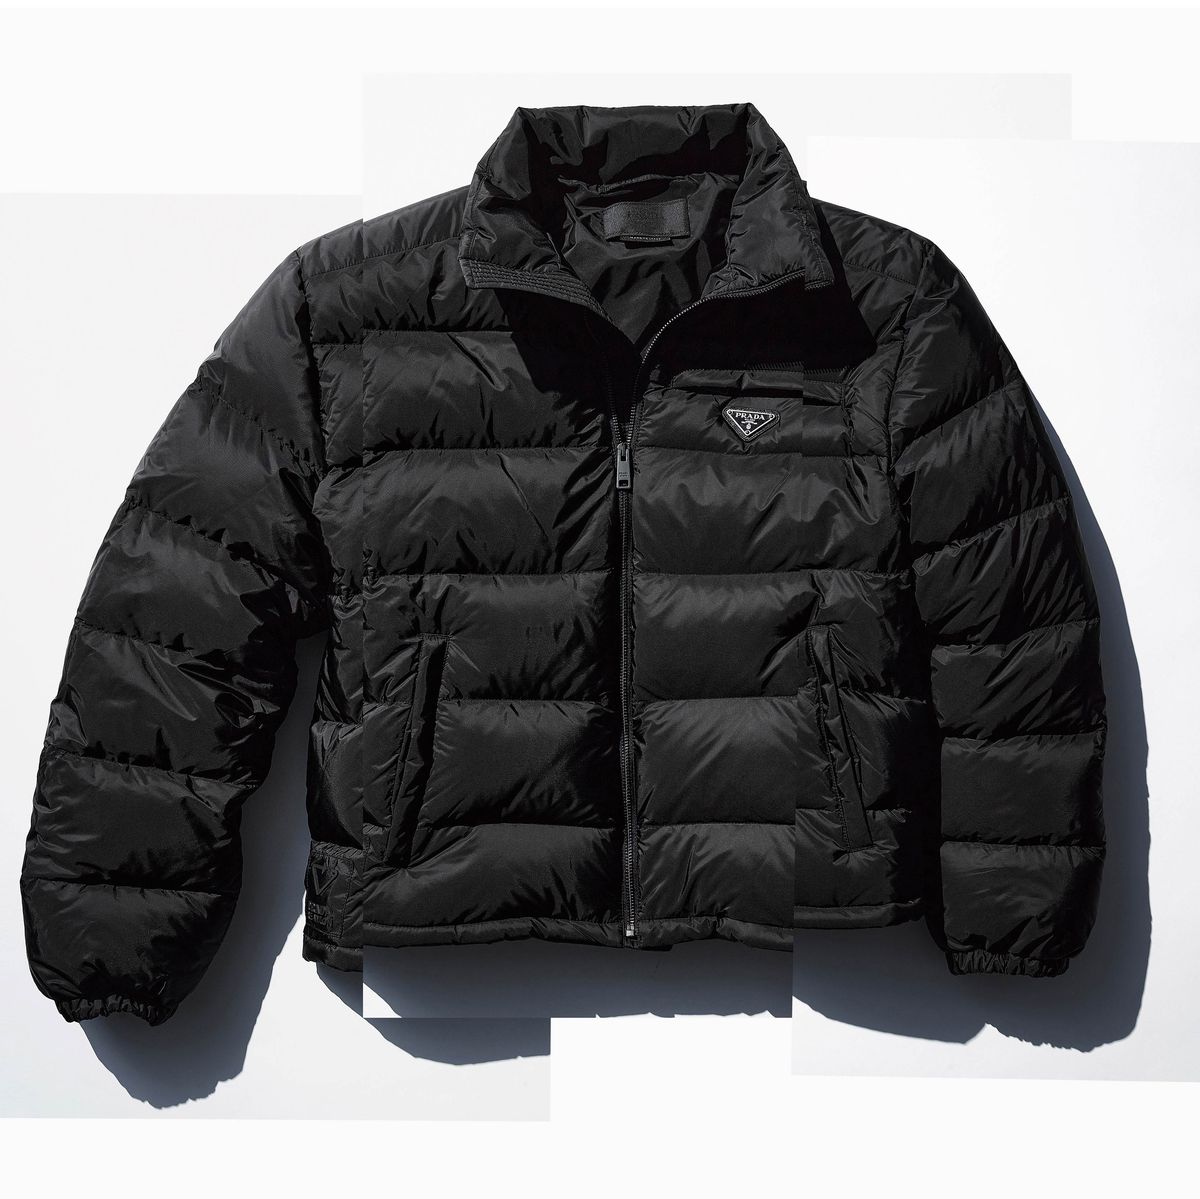 Prada ReNylon Puffer Jacket Review - The Esquire Investment